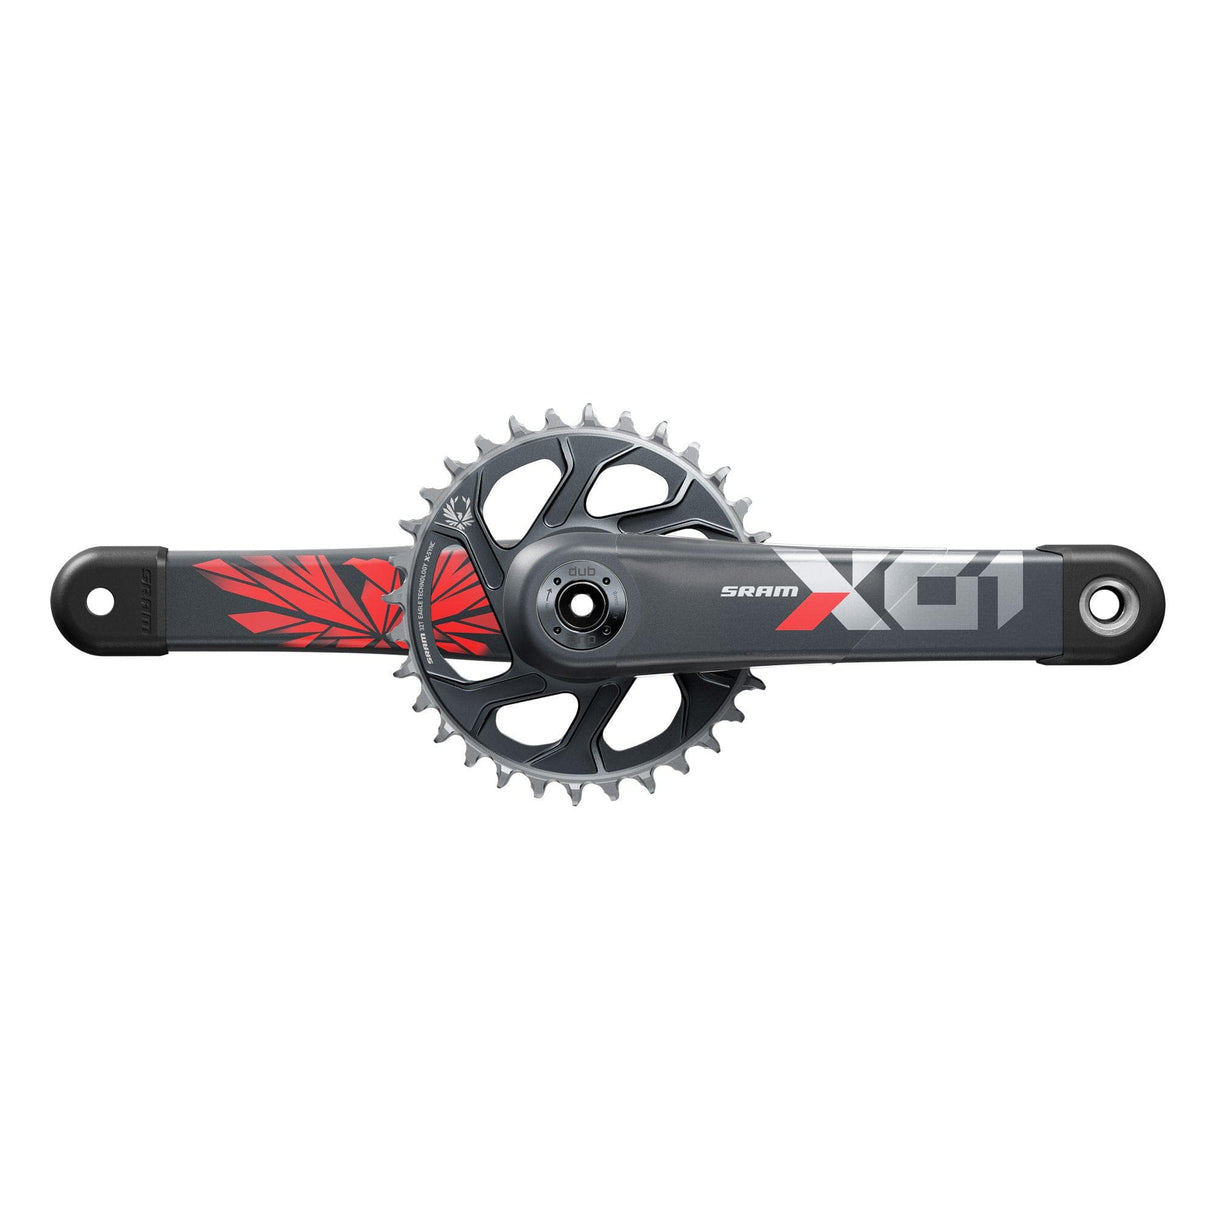 Sram Crankset X01 Eagle Superboost+ Dub 12S W Direct Mount 32T X-Sync 2 Chainring (Dub Cups/Bearings Not Included) C3: Lunar Oxy 165Mm